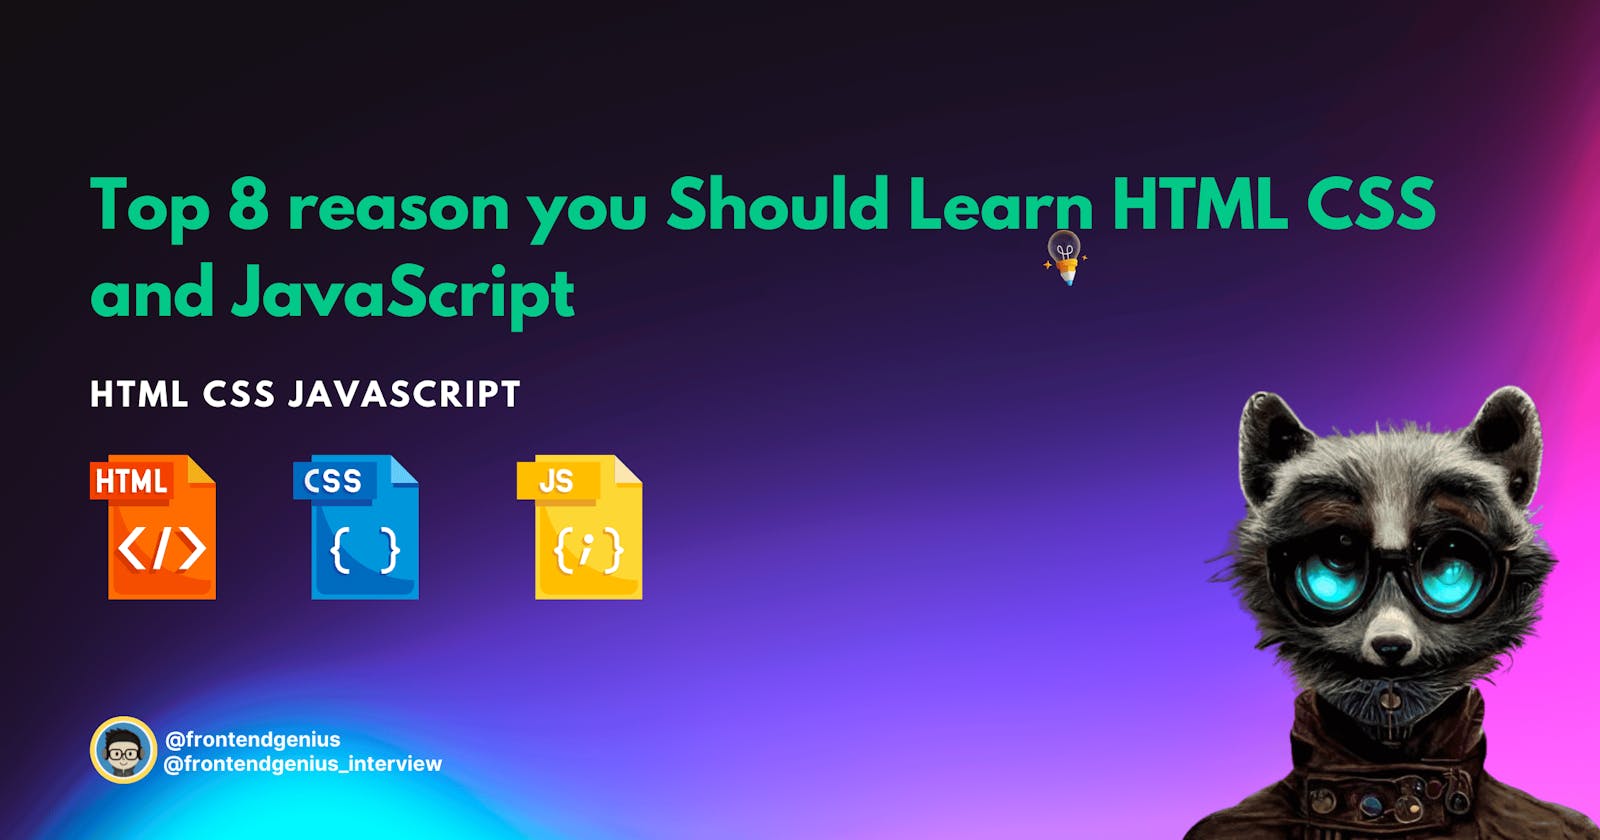 Top 8 Reasons Why You Should Learn HTML, CSS, and JavaScript